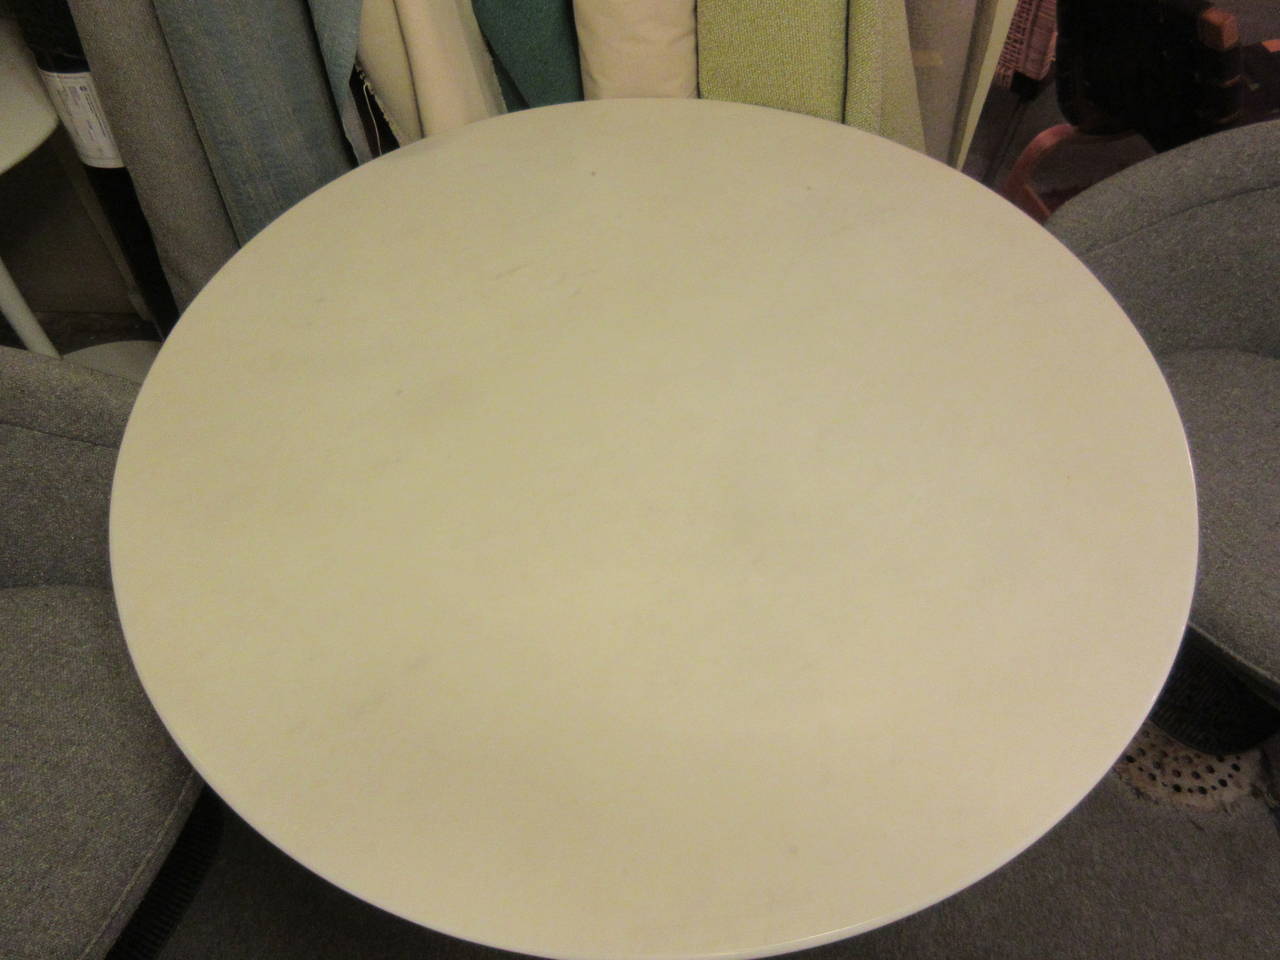 Dining table 42 inches in diameter with cast aluminum base by Knoll marble is white with very faint marbling of gray. Base is pure white.